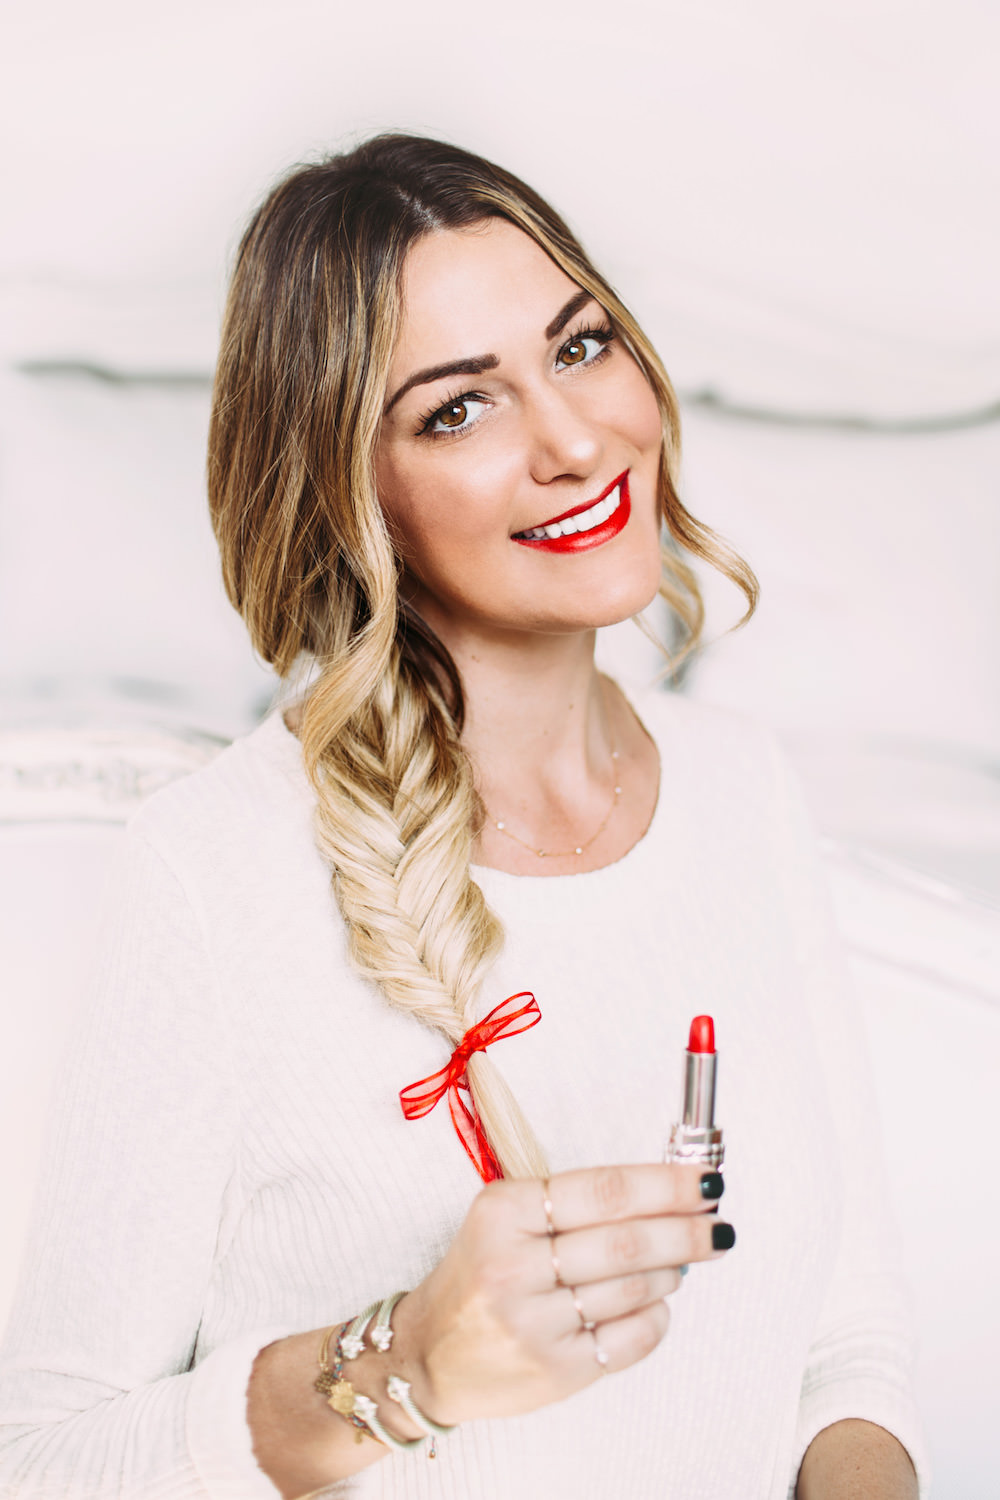 Dash of Darling shares four holiday beauty routines that will get you in the festive spirit